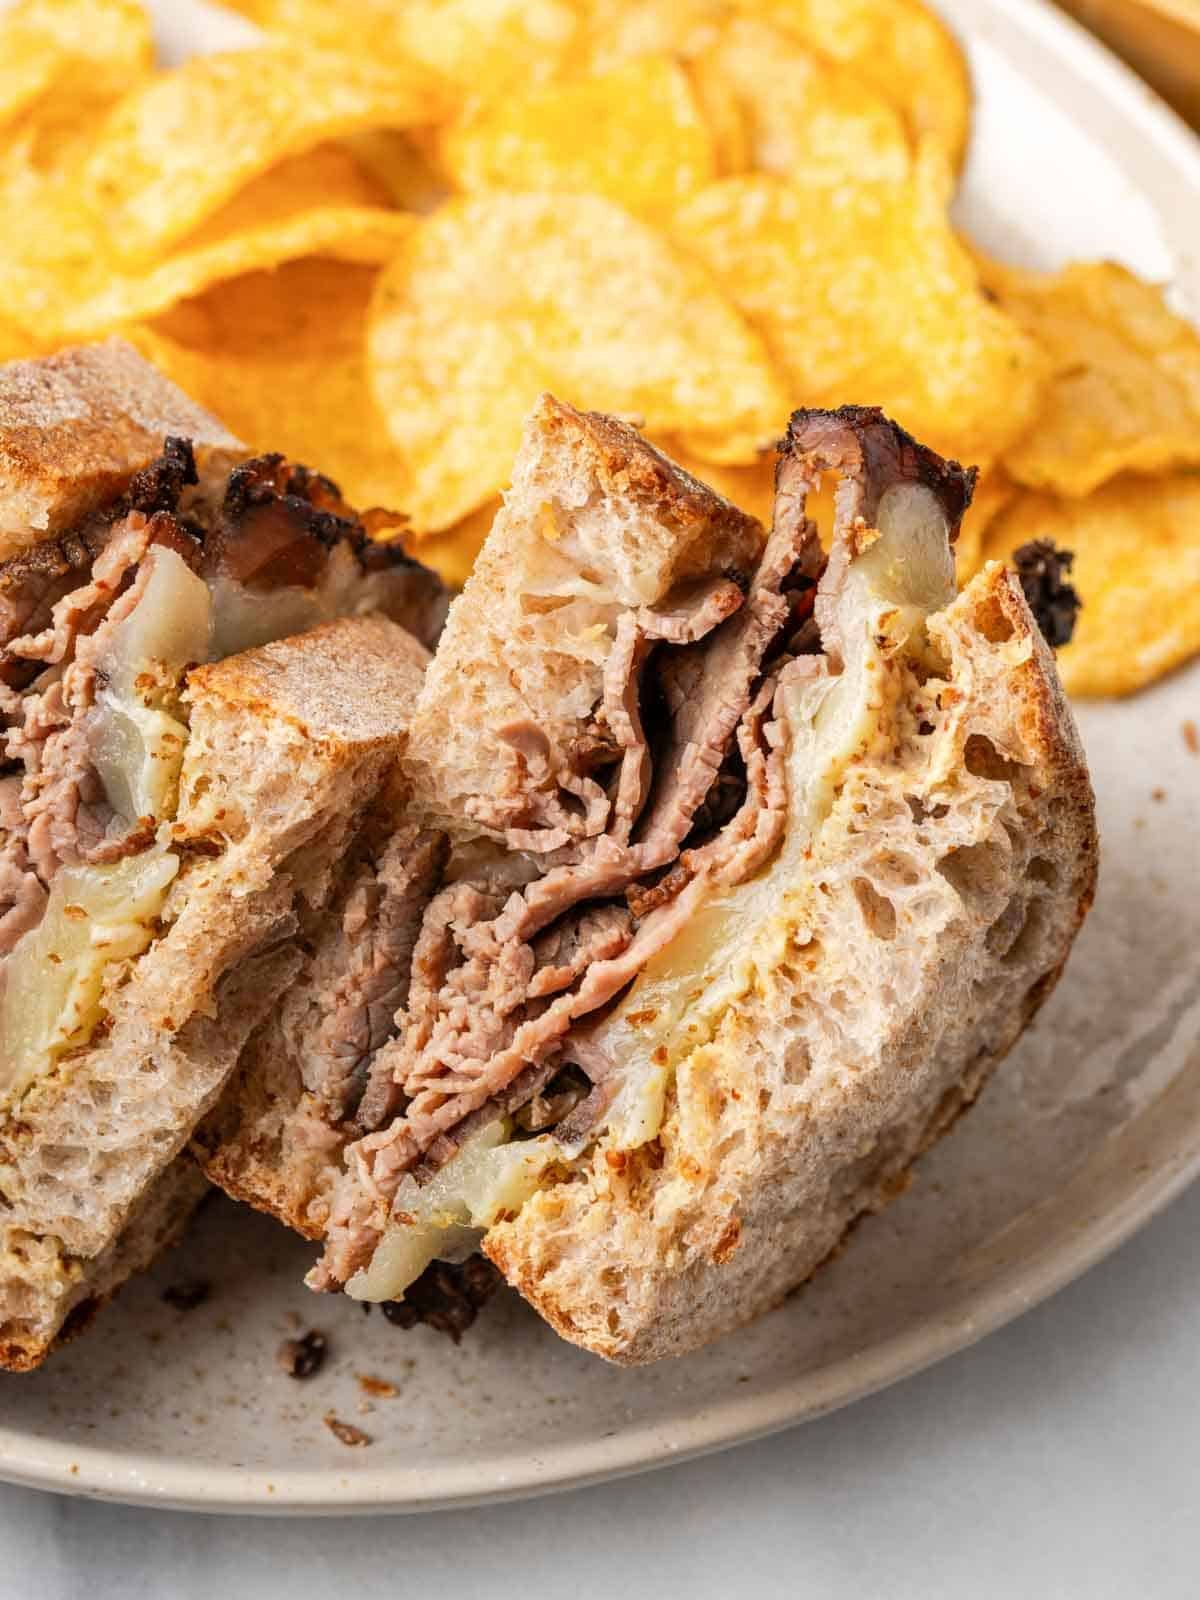 roast beef sandwich halves on plate with chips.